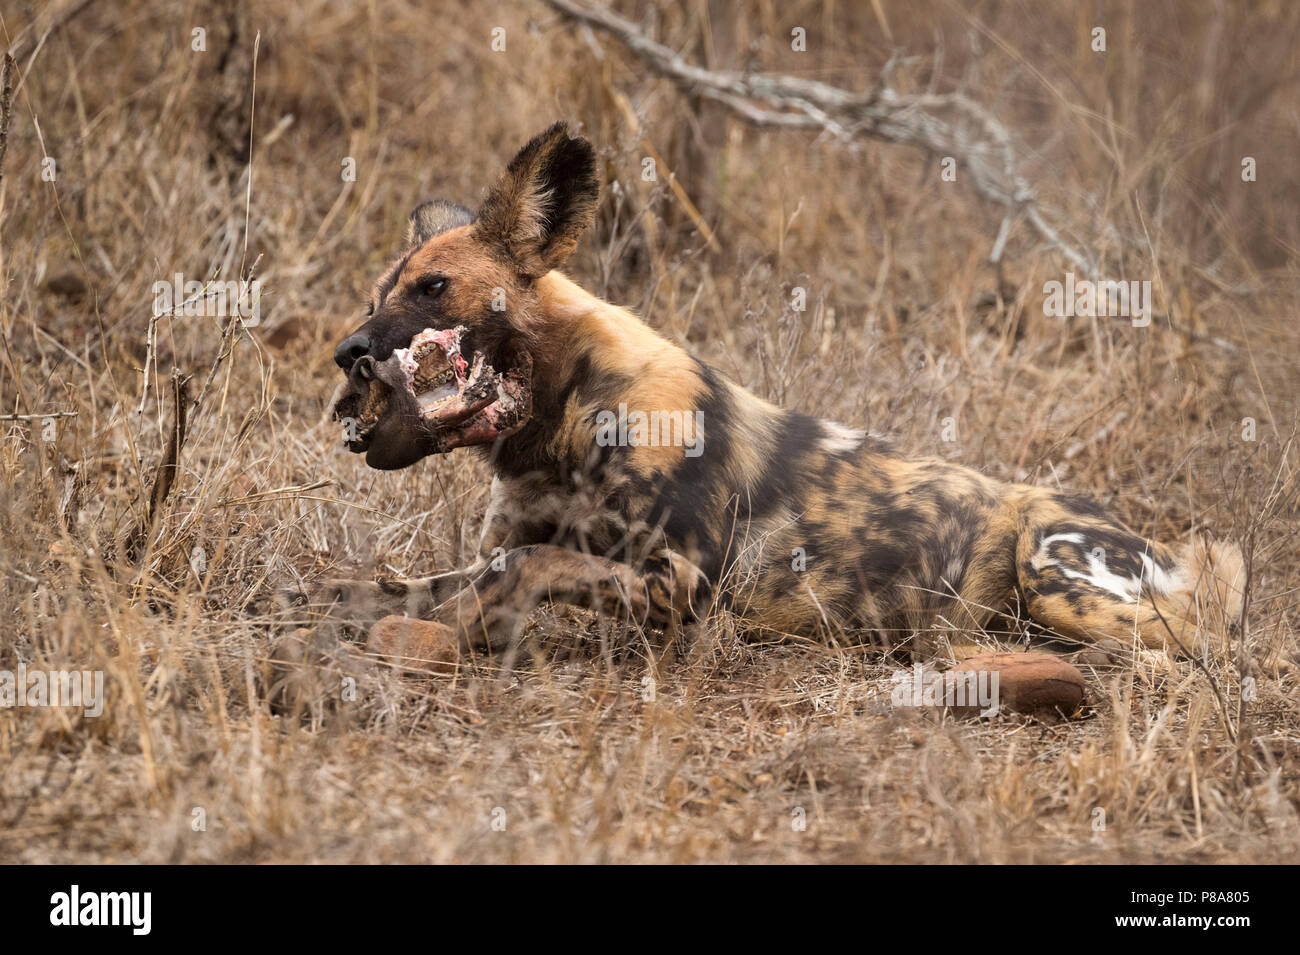 African wild dog (Lycaon pictus) with remains of warthog kill, Zimanga private game reserve, KwaZulu-Natal, South Africa Stock Photo